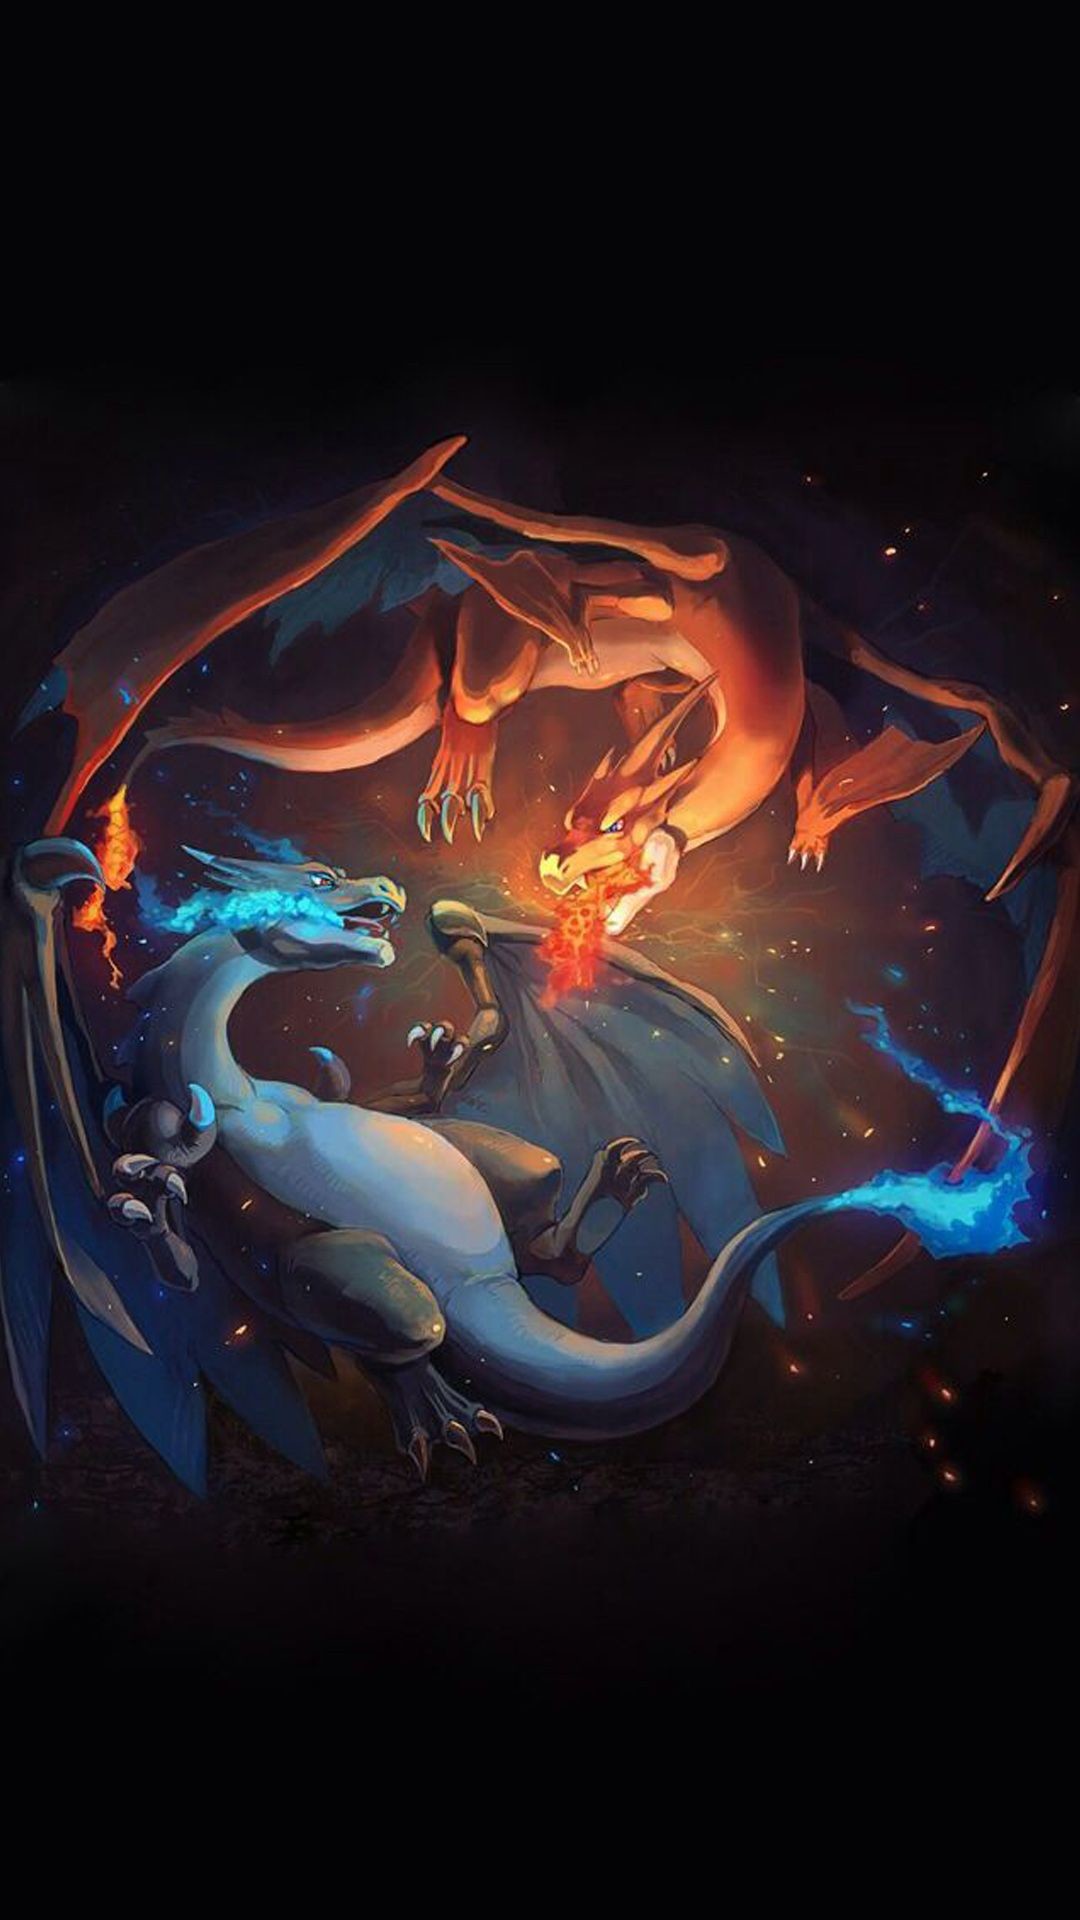 1080x1920, Awesome Iphone Wallpaper Tumblr 176 Check - Pokemon Fighting Each Other - HD Wallpaper 